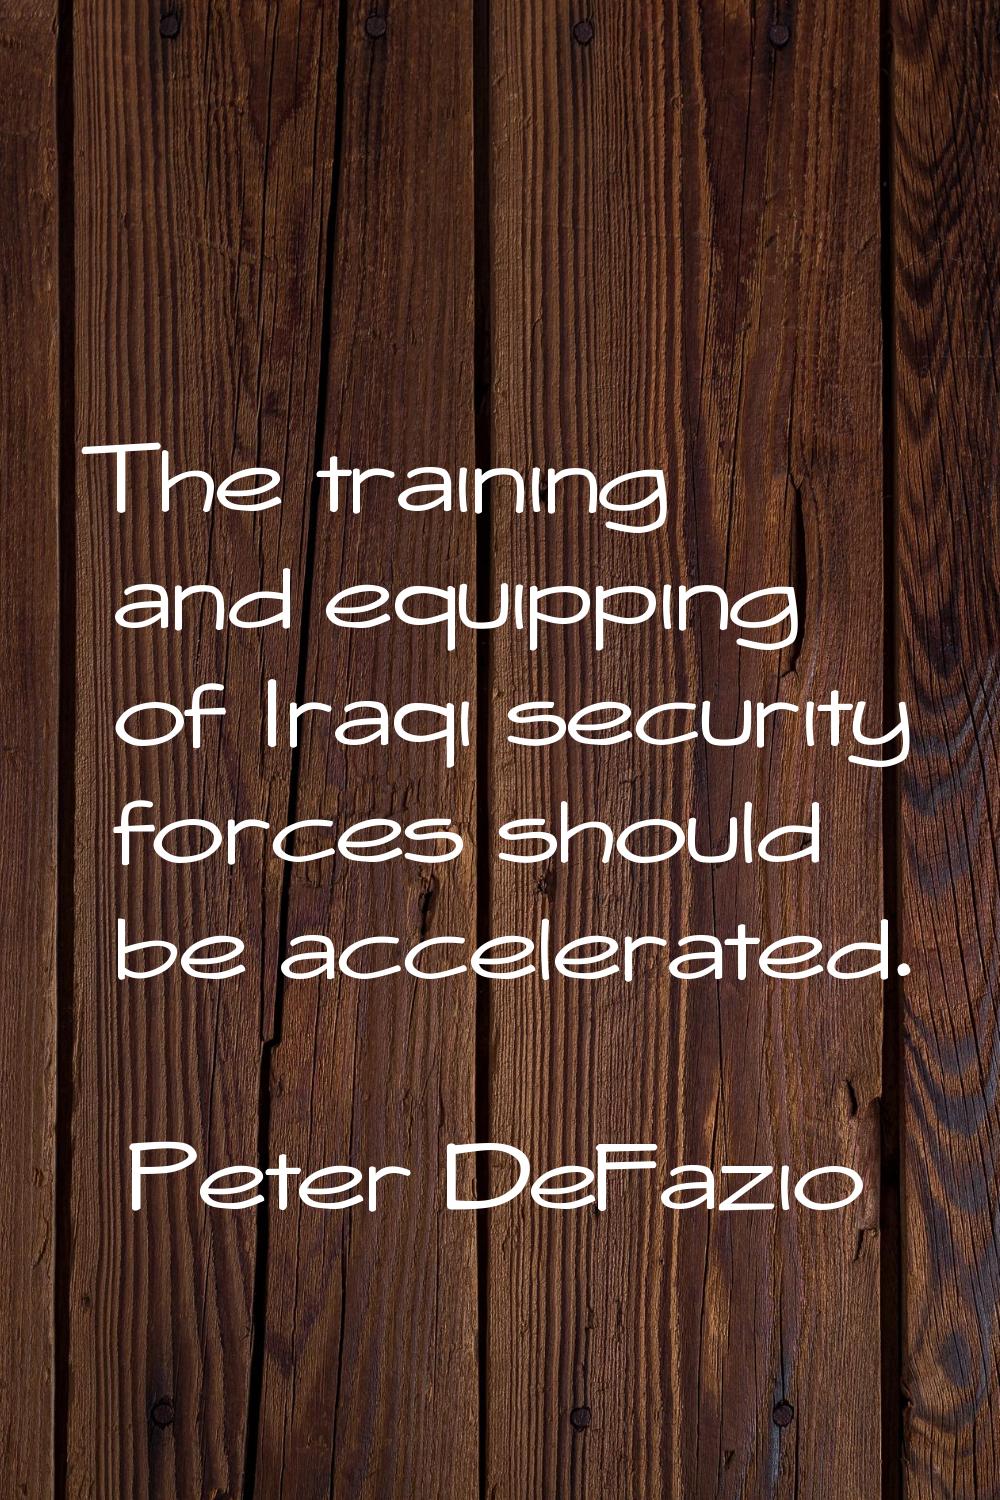 The training and equipping of Iraqi security forces should be accelerated.